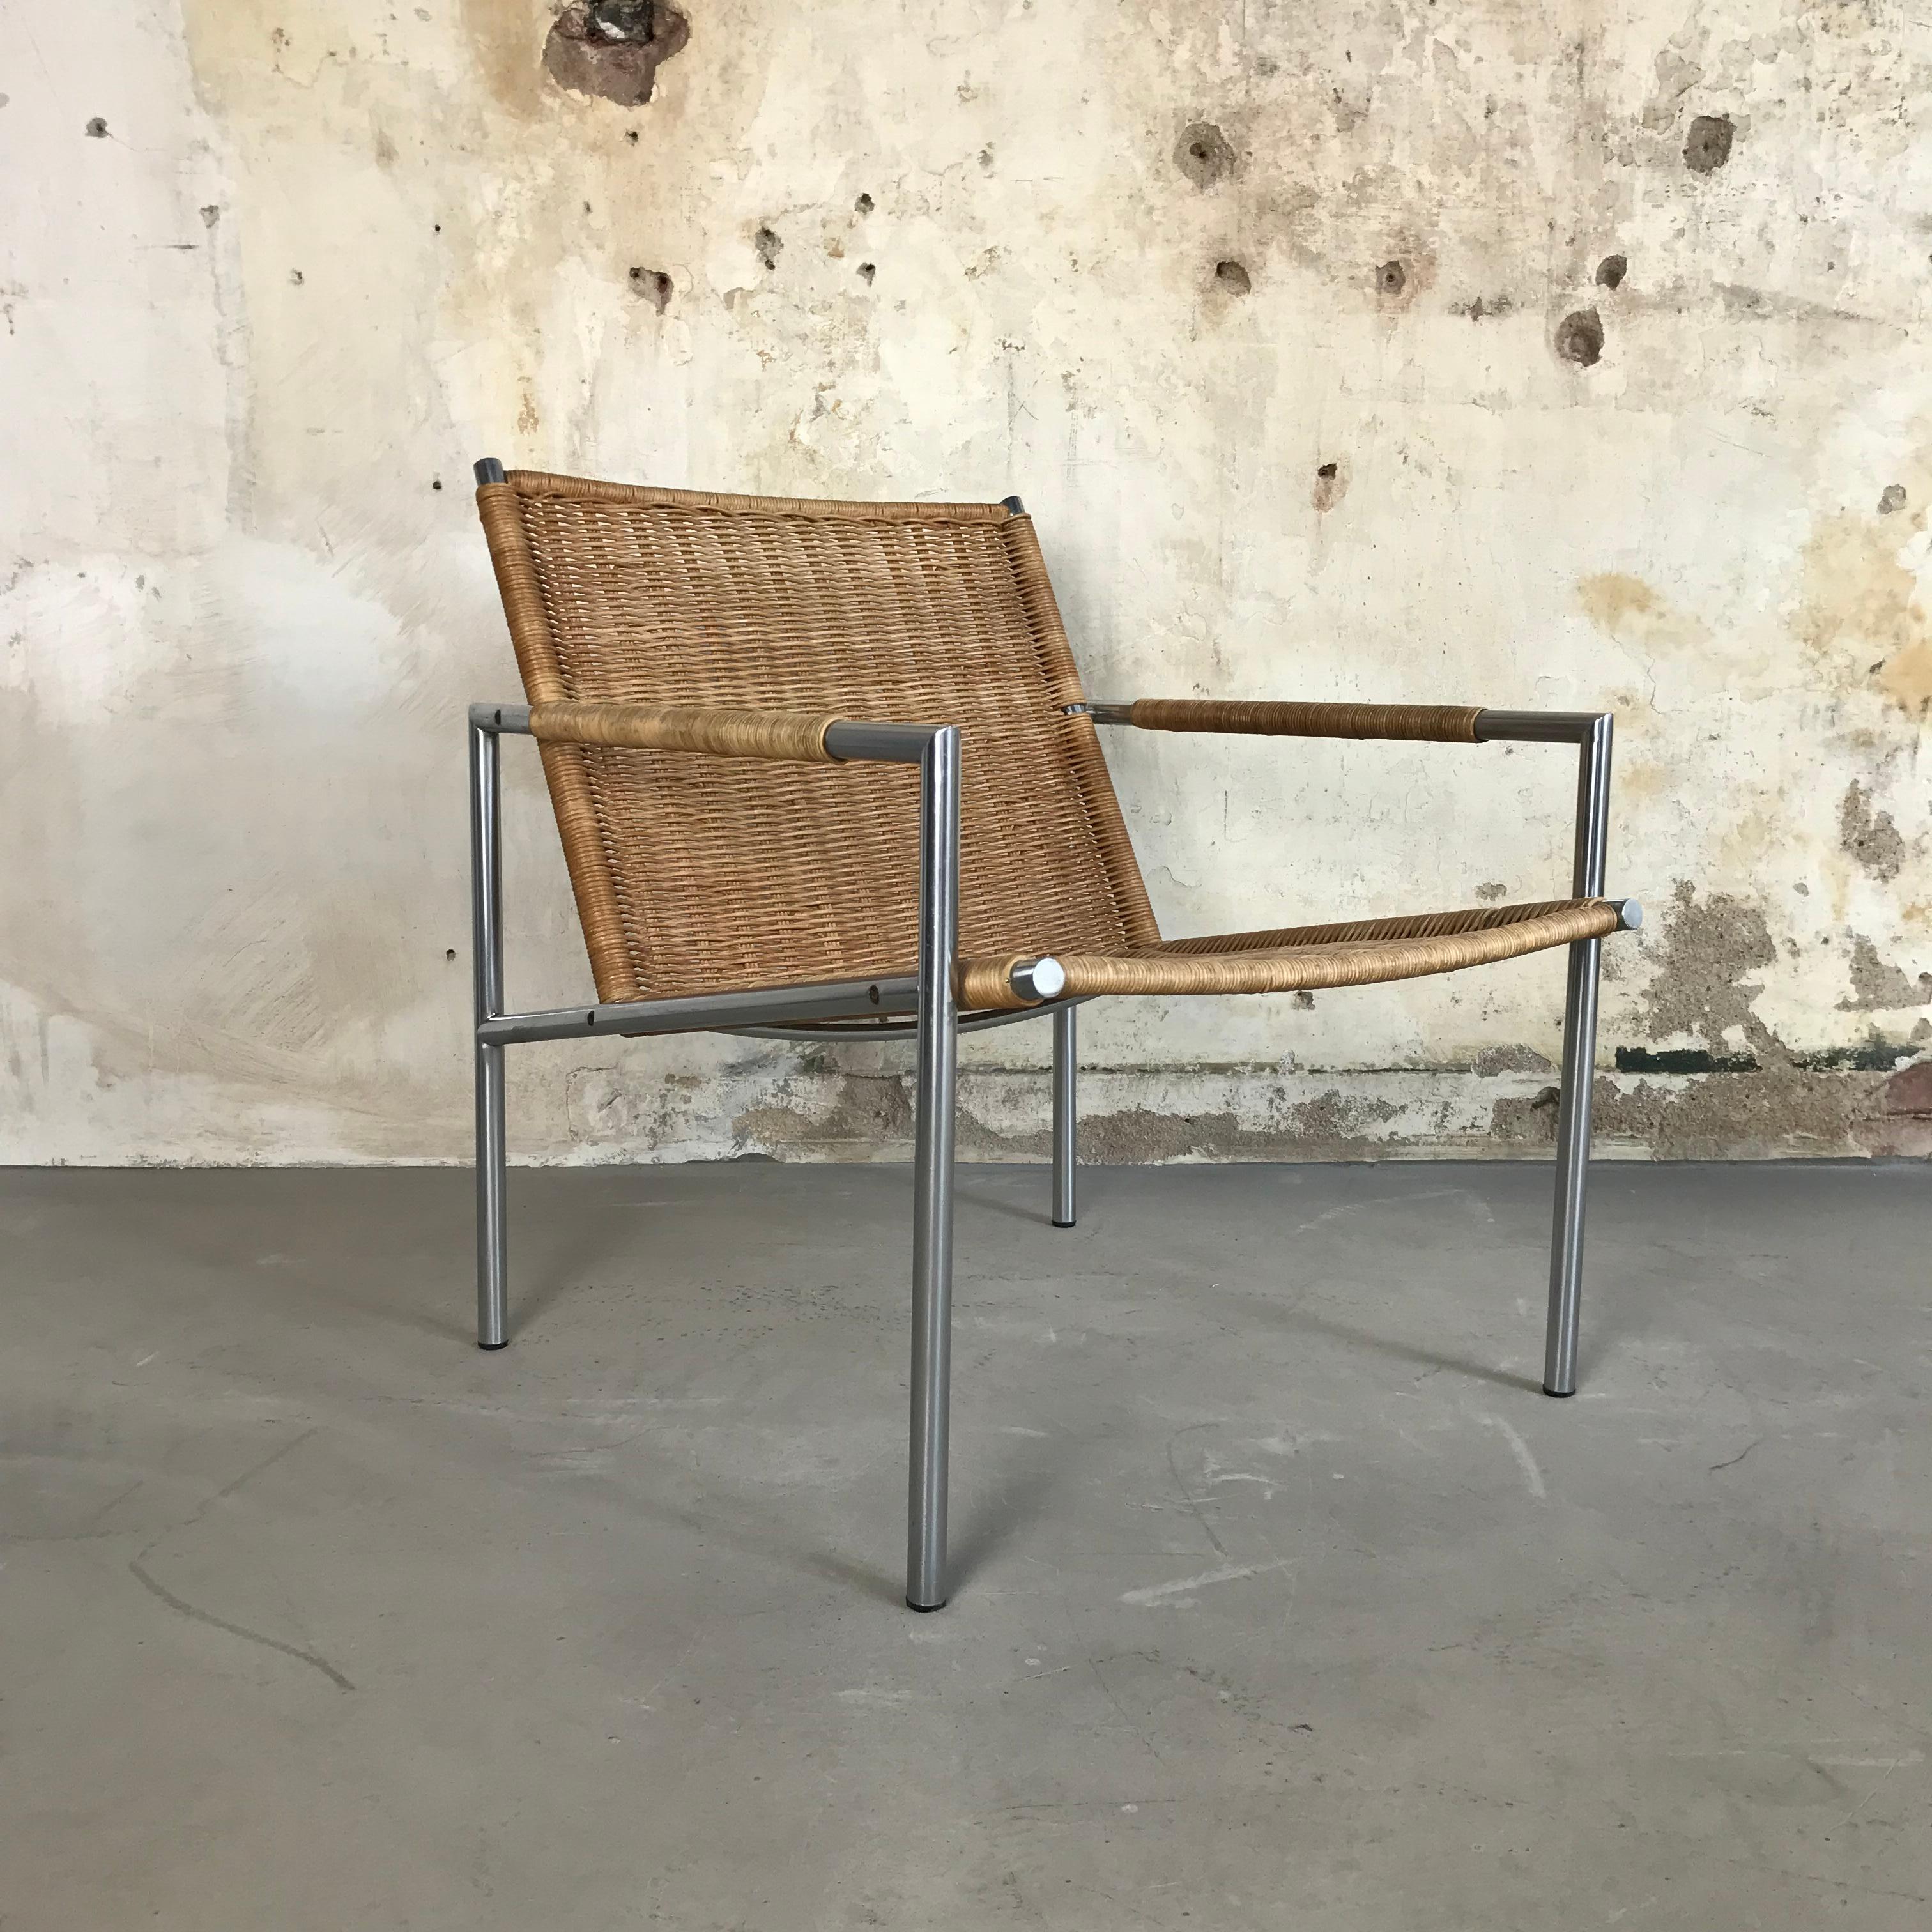 Beautiful and well-known easychair / armchair designed by the Dutch designer Martin Visser and produced by Spectrum, The Netherlands. Designed in 1960 and still in production ever since. Features a tubular brushed metal frame and woven rattan seat